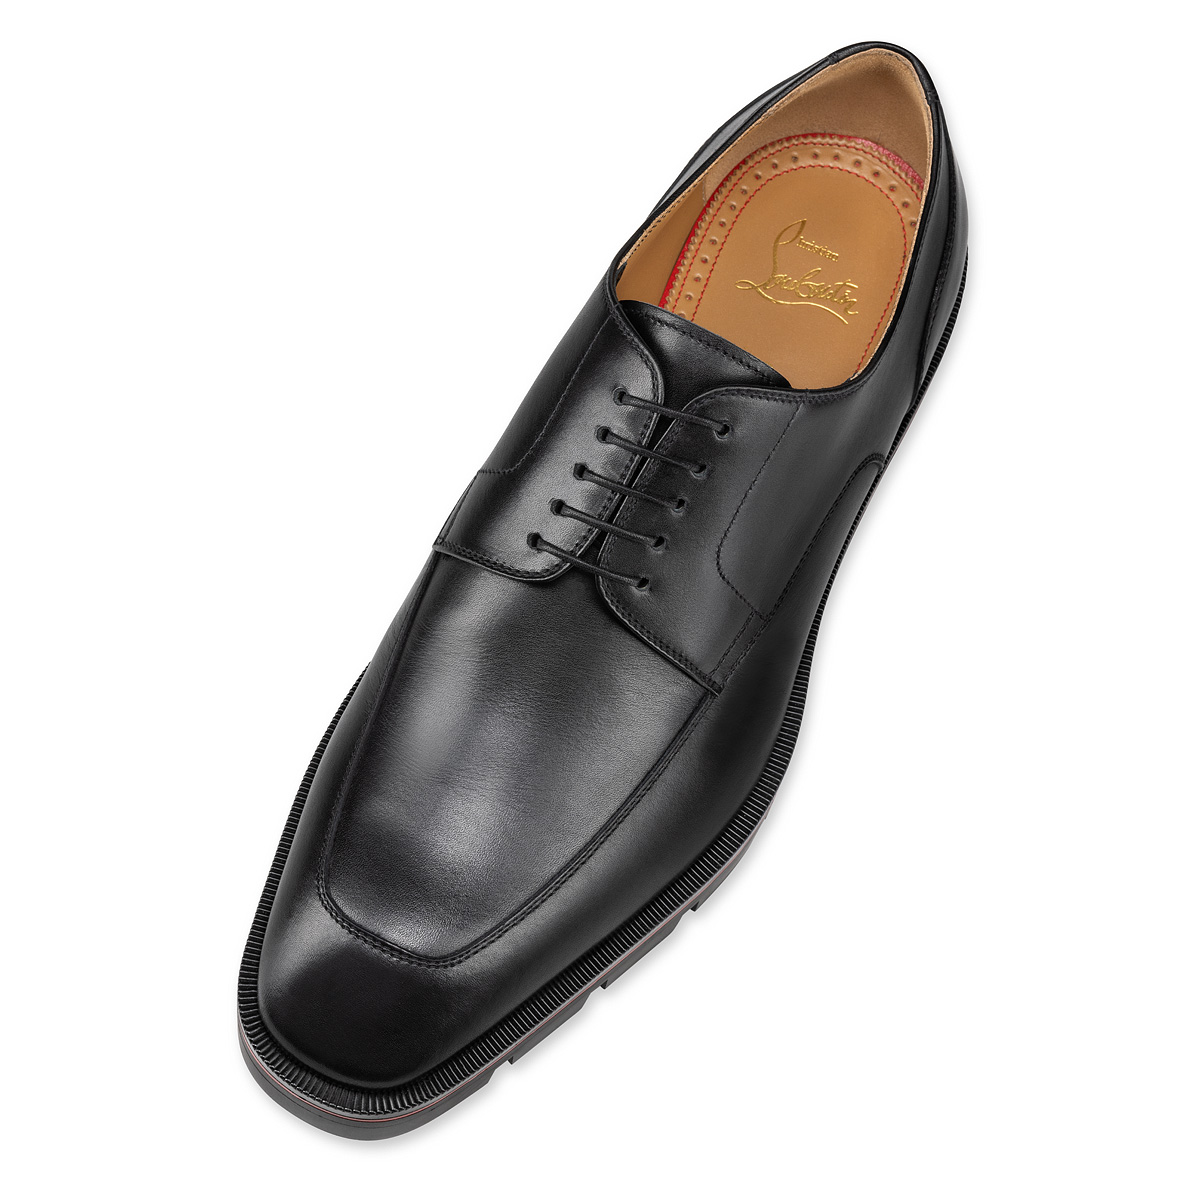 David Genuine Leather Red Bottom Dress Shoes